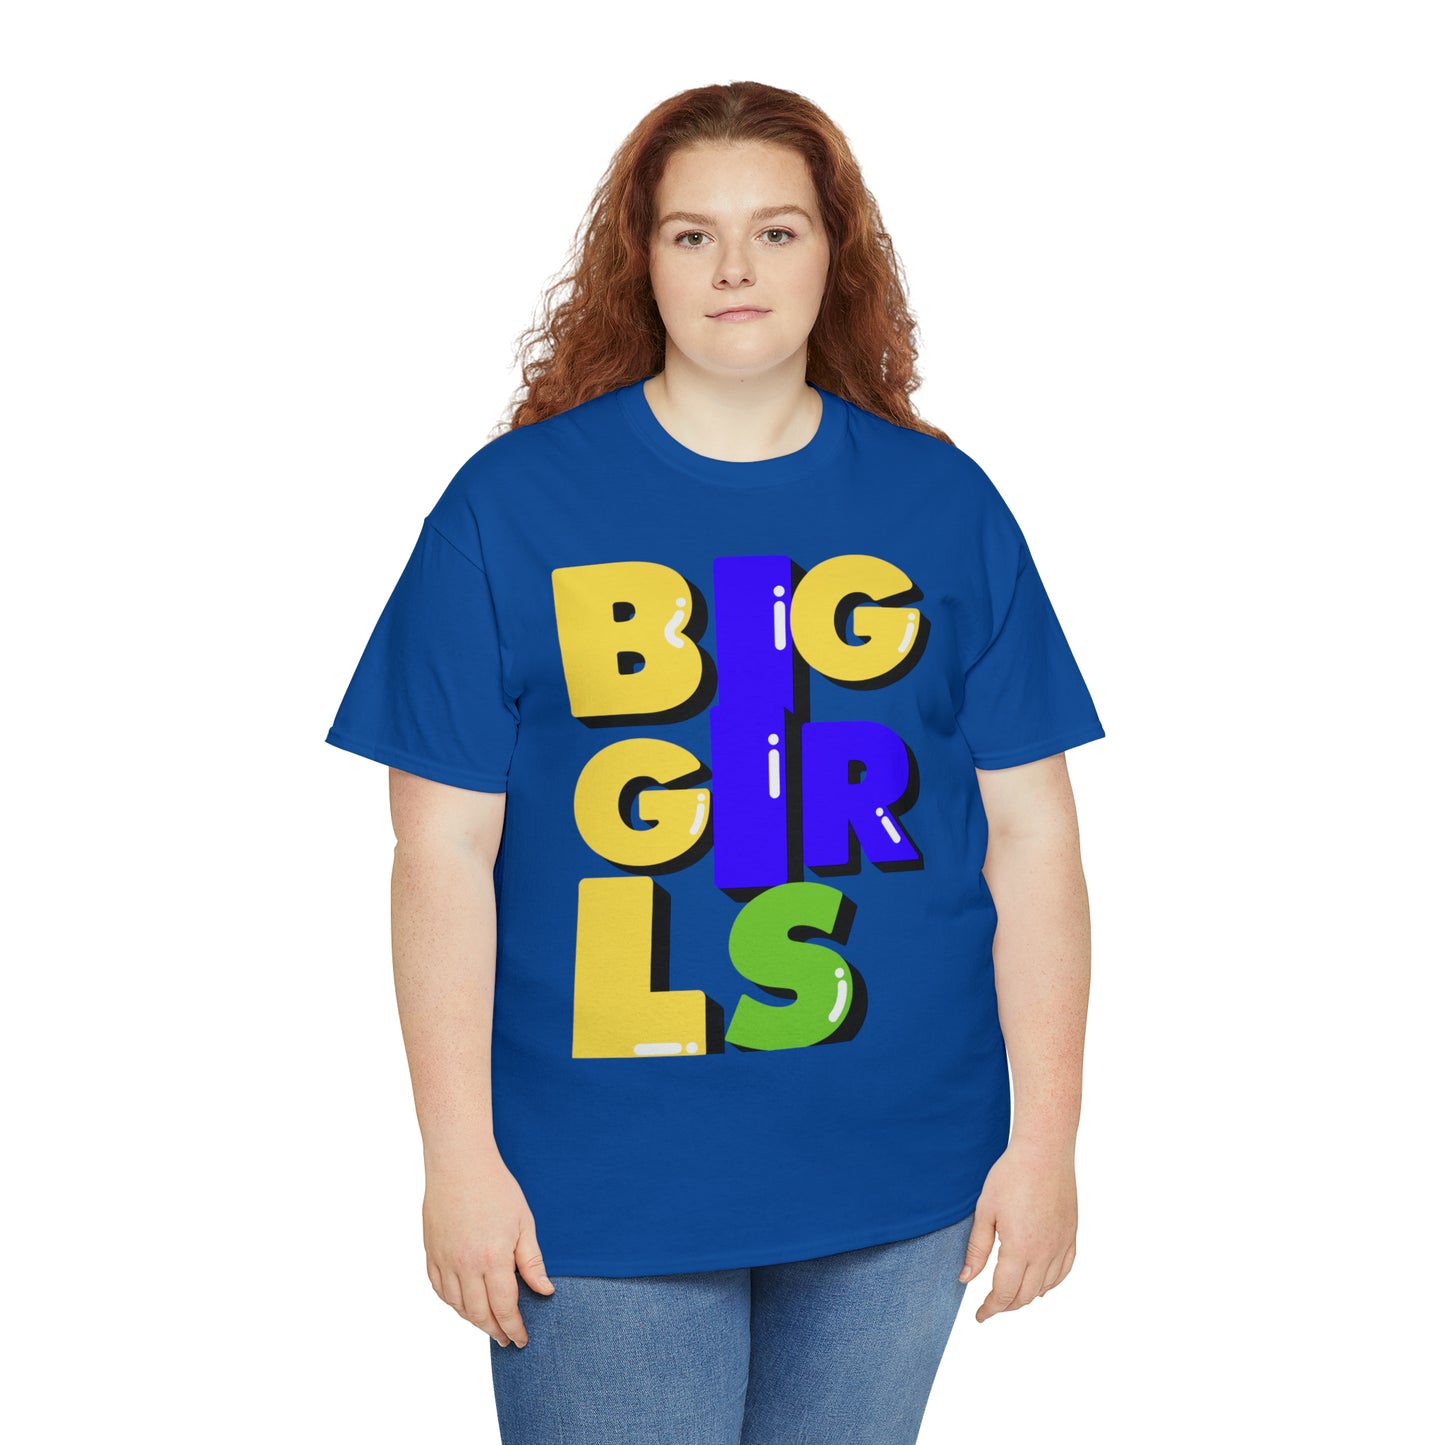 Plus Size Tops Plus Size Tee Women's Tee Gift for her Big Girl Literary Merchandise